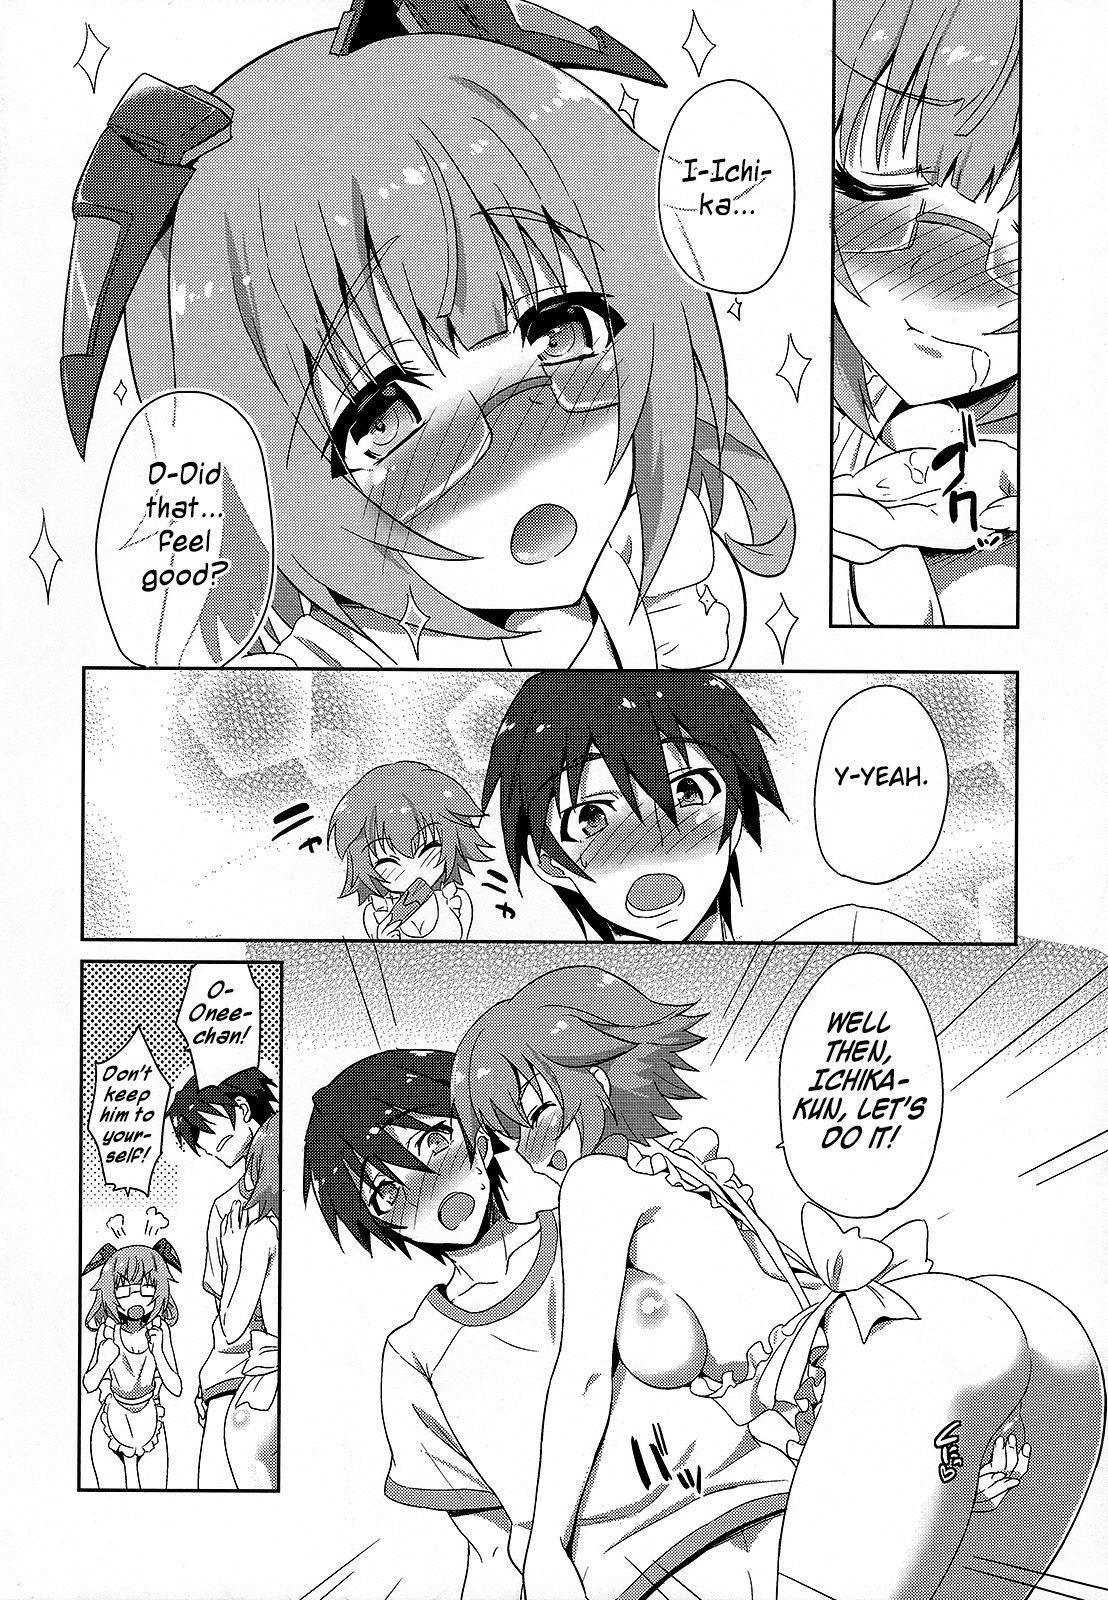 Public Nudity IS ICHIKA LOVE SISTERS!! - Infinite stratos Kitchen - Page 9